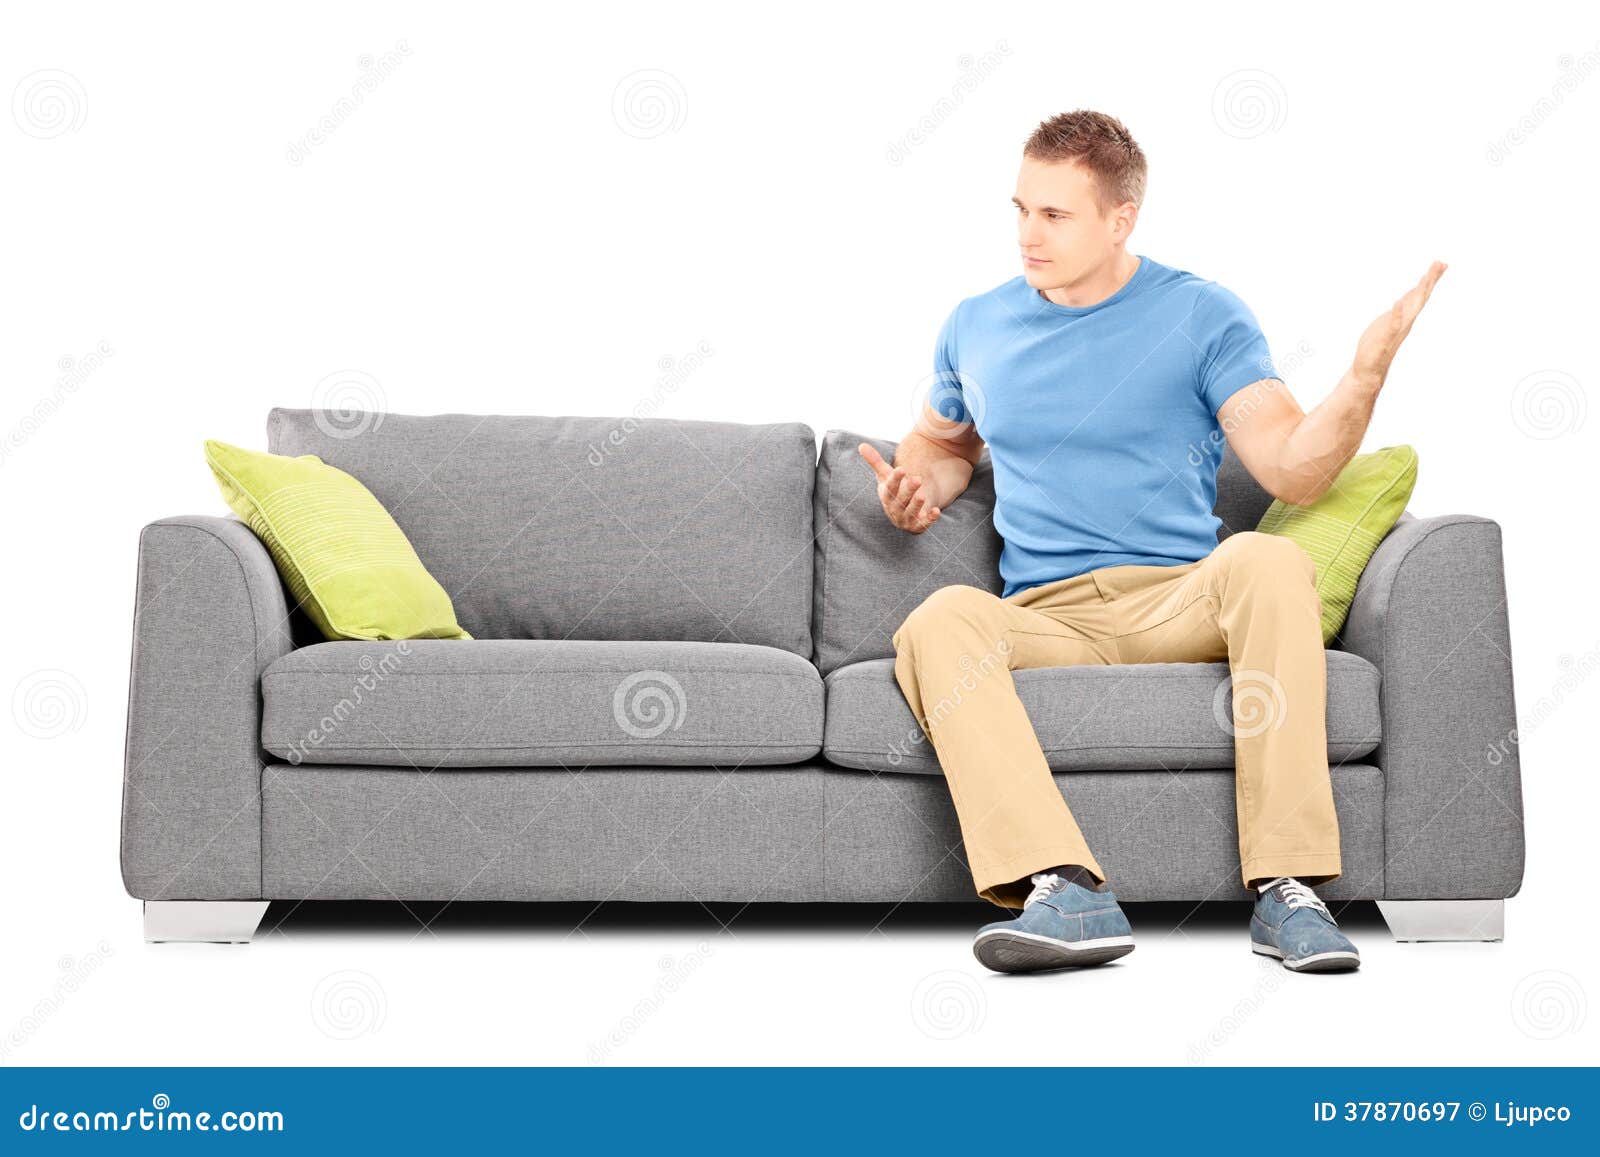 bernard lavilliers add guy sitting on couch photo